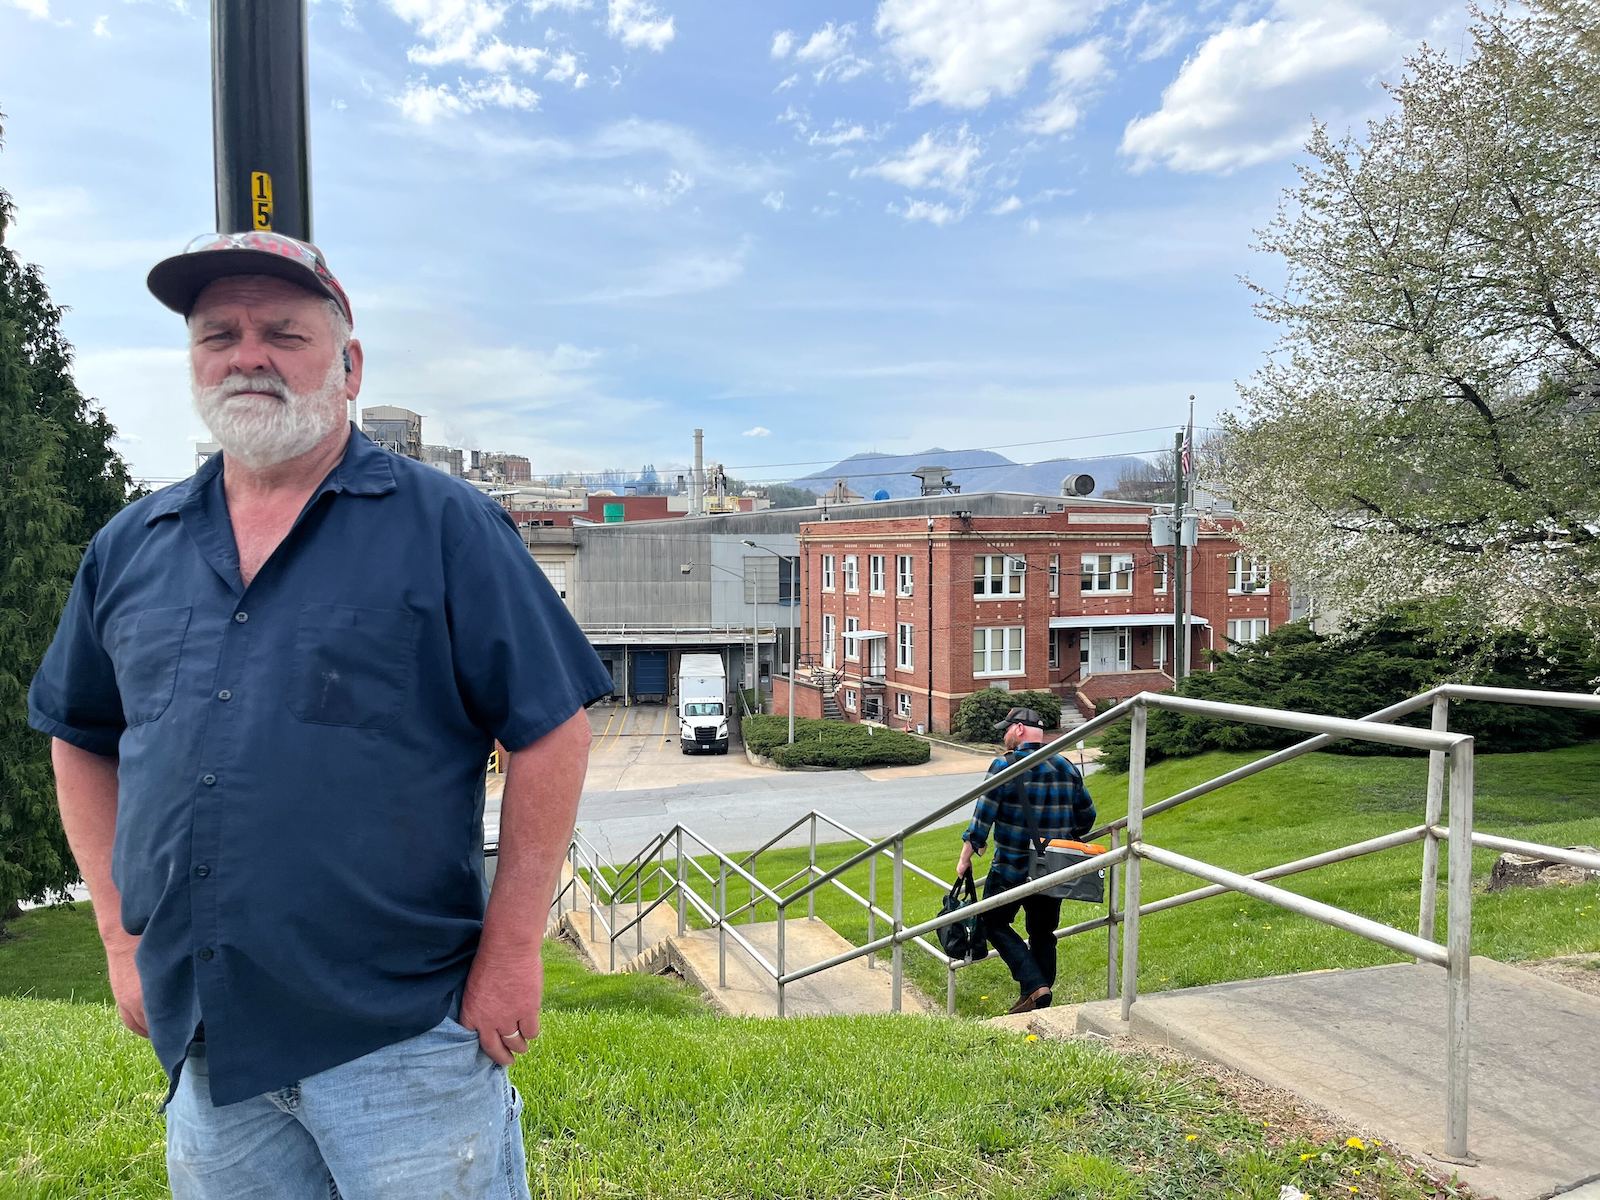 A longtime millworker in Canton, North Carolina, stands on a green lawn alongside a staircase. He is wearing blue jeans, a blue shirt, and a ball cap.